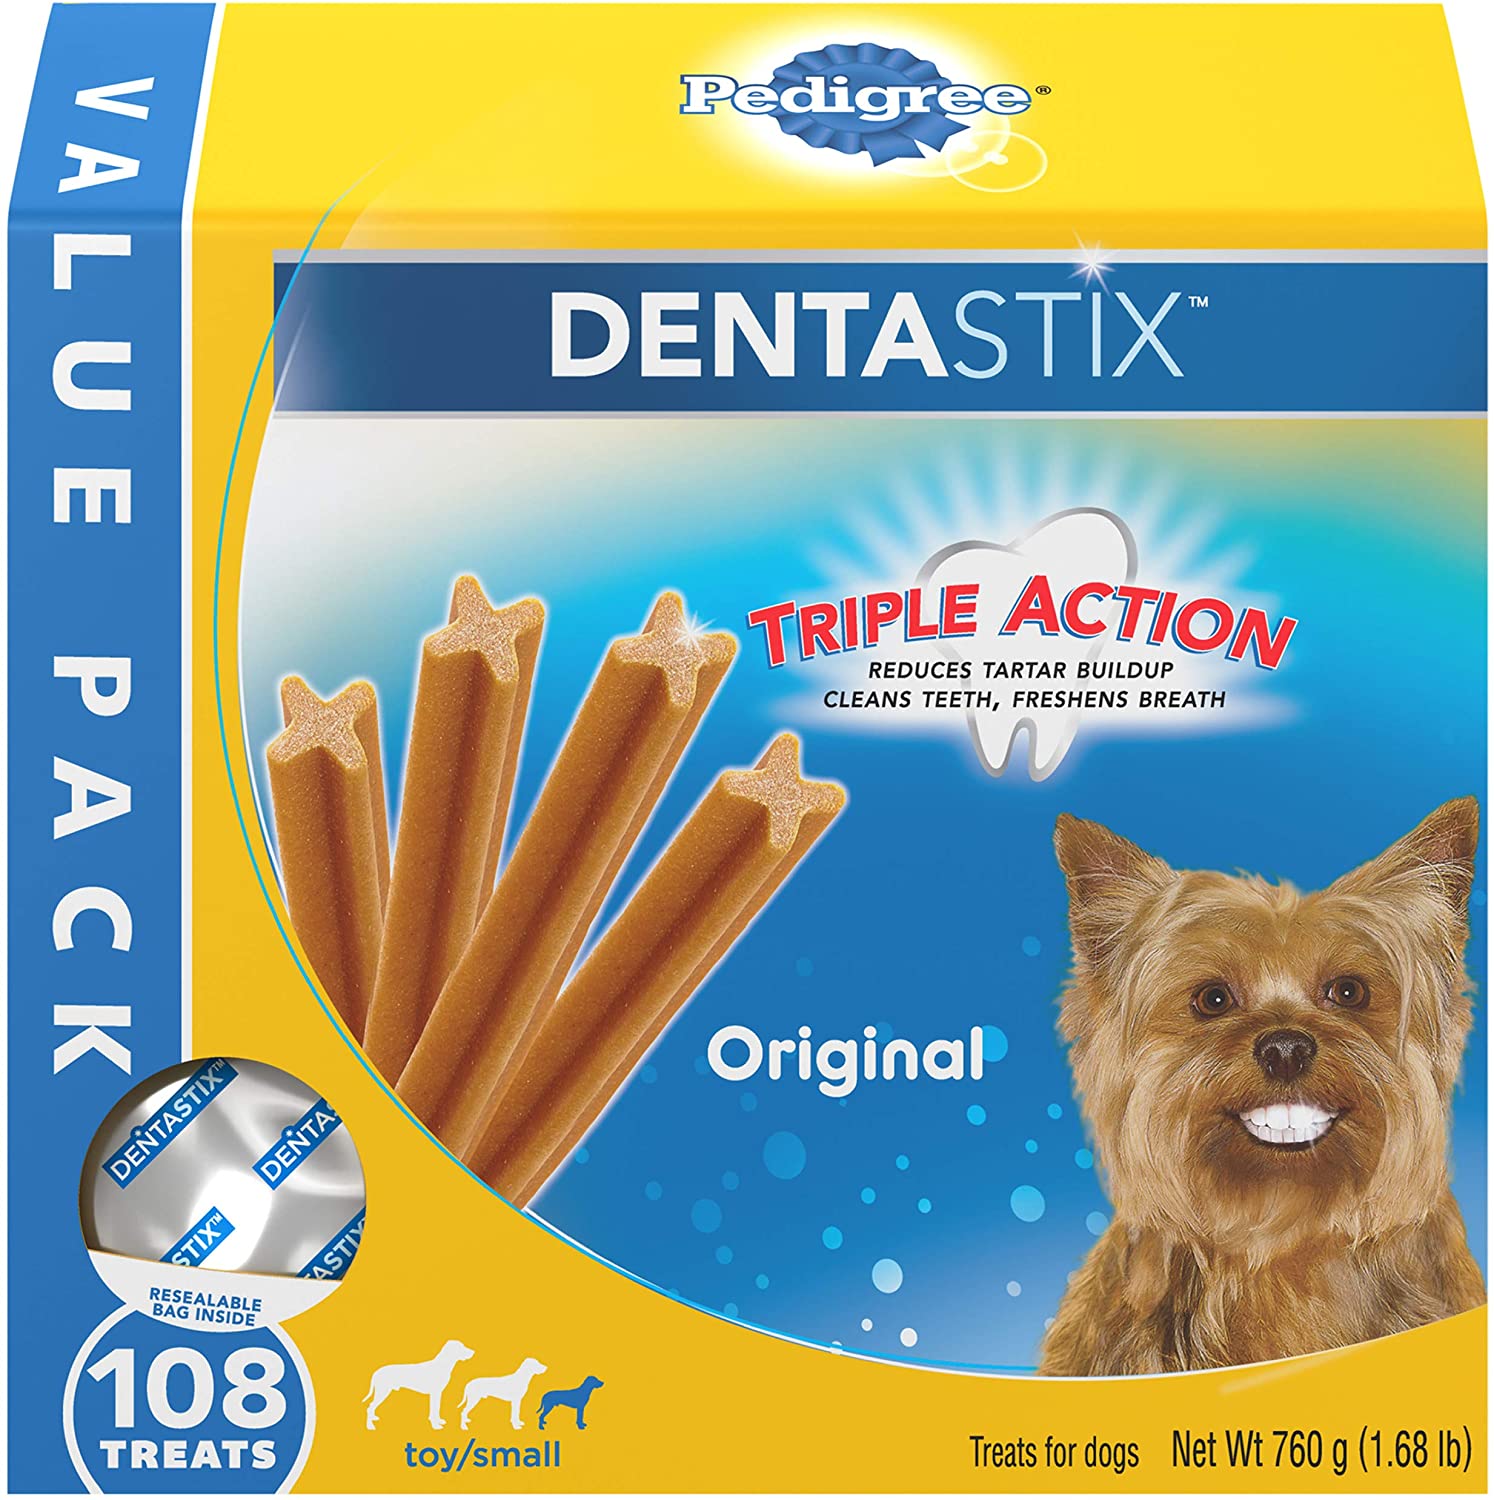 Pedigree DENTASTIX Adult & Puppy Toy/Small Treats for Dogs 5-20lbs. EXTRA $5.00 Coupon Off Before S&S $9.03 Shipped amazon Prime